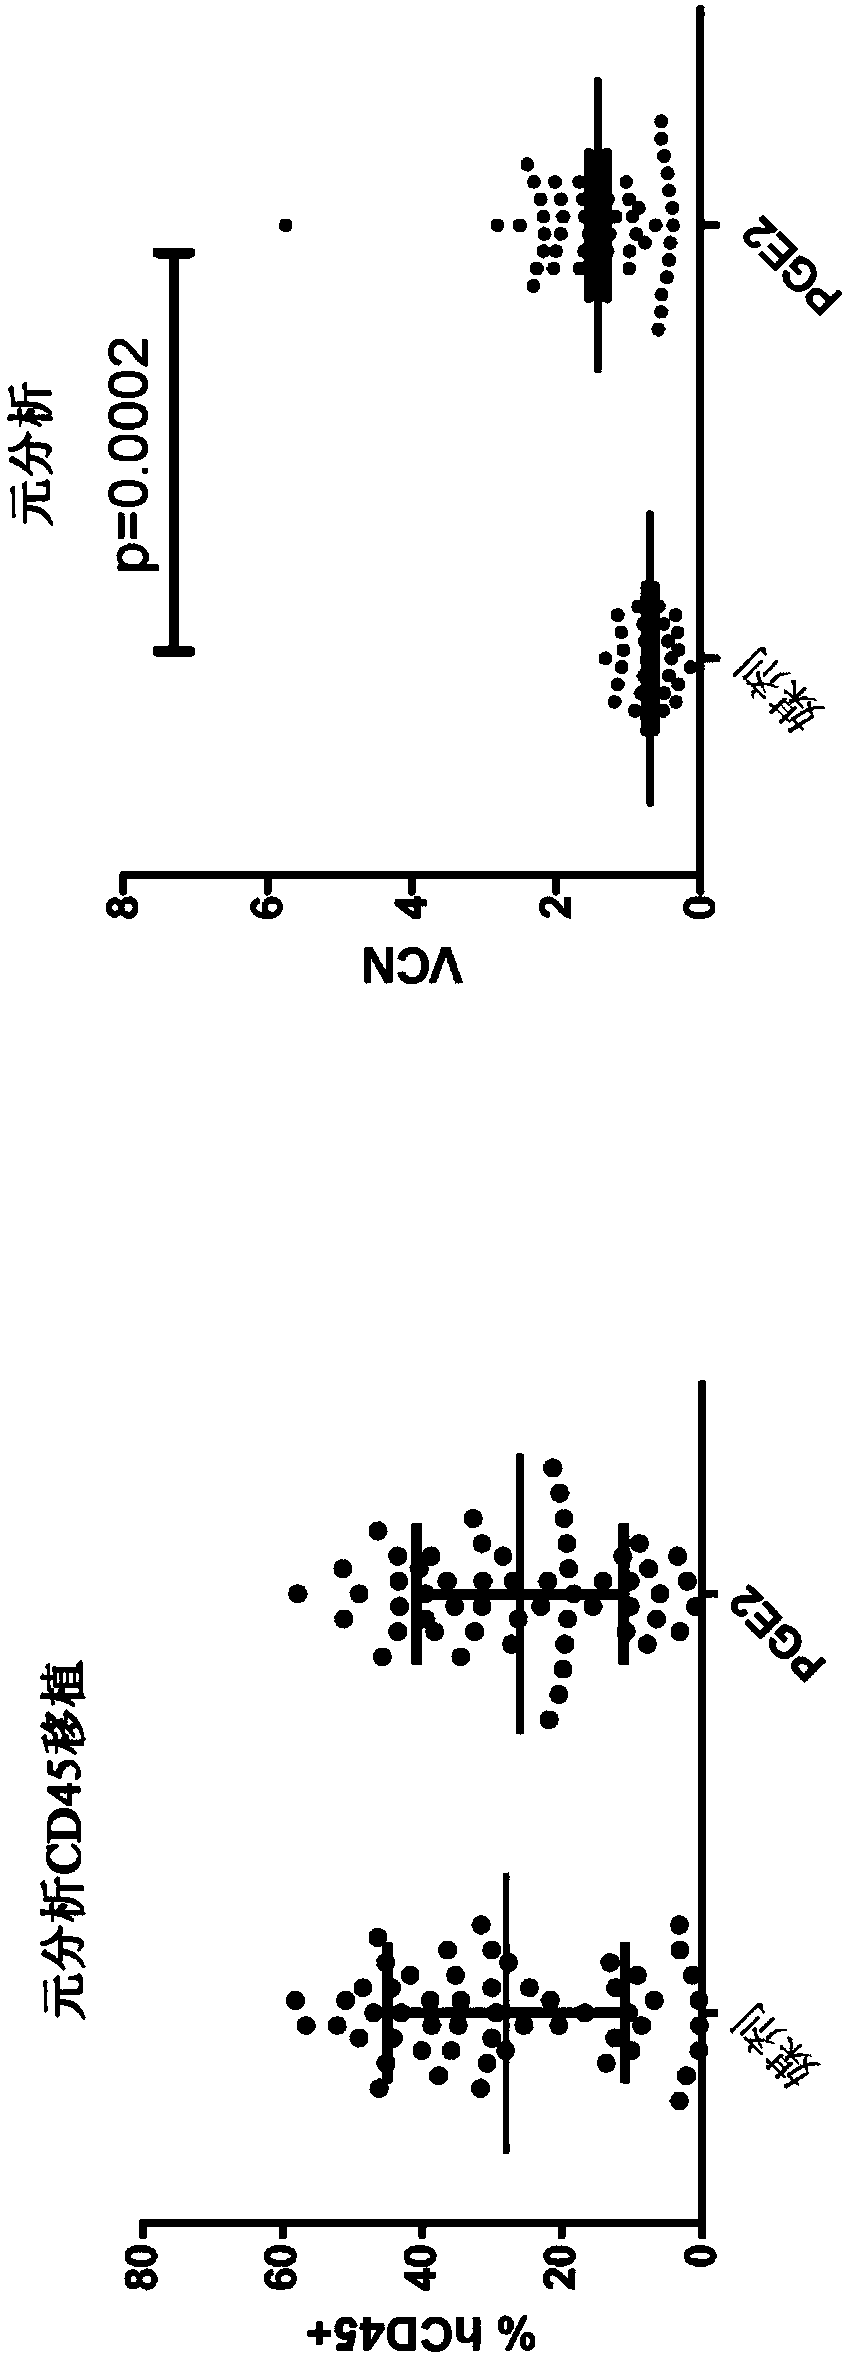 Vcn enhancer compositions and methods of using the same